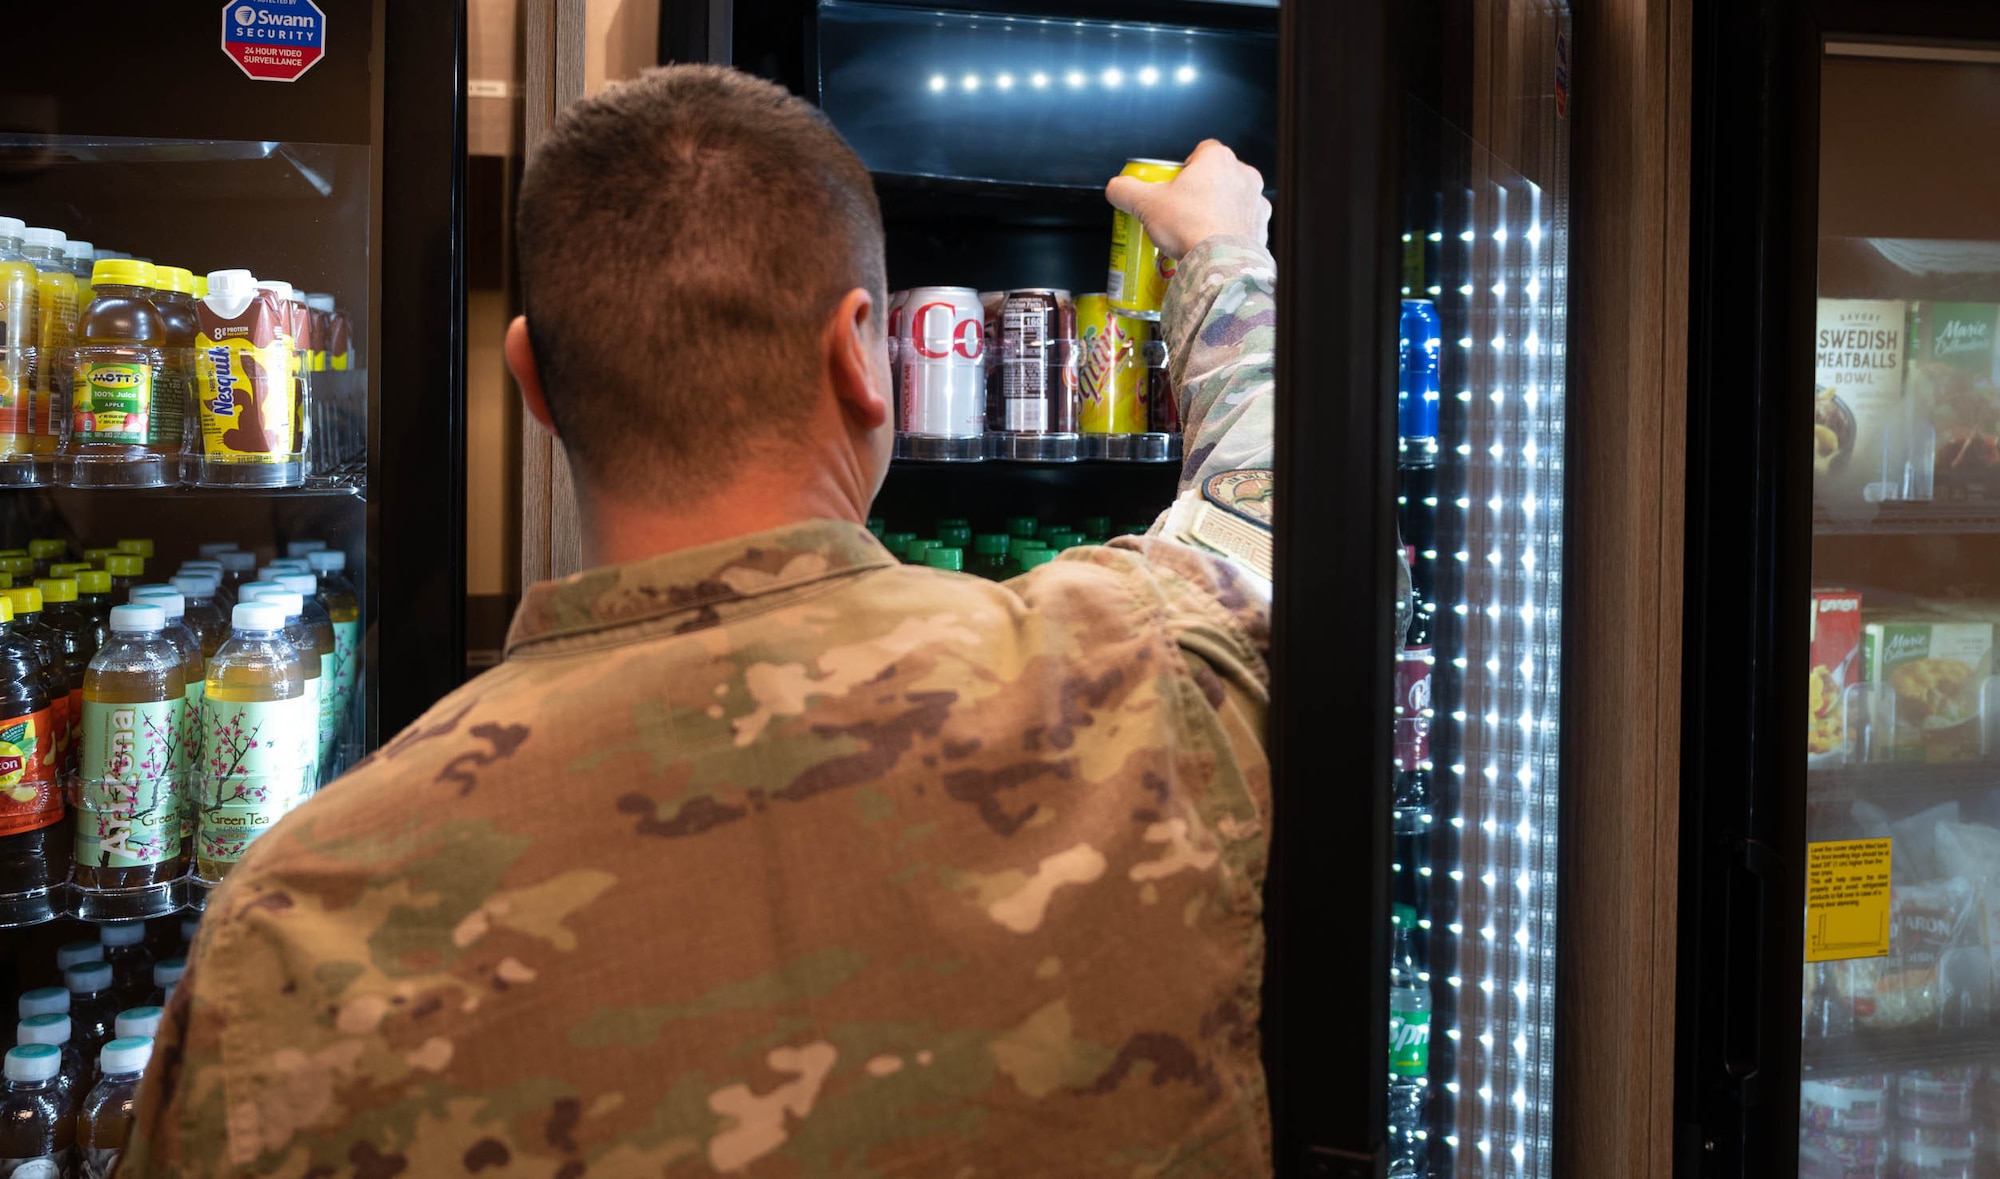 Tech. Sgt. Mark Malley, 5th Civil Engineering Squadron dorm management, grabs a beverage inside the newly opened Myers Market at Minot Air Force Base, North Dakota, Nov. 15, 2023. Myers Market is located inside the Vosler Hall dormitory and provides beverages, snacks, candy and frozen food available for Airmen to purchase. (U.S. Air Force photo by Airman 1st Class Luis Gomez)